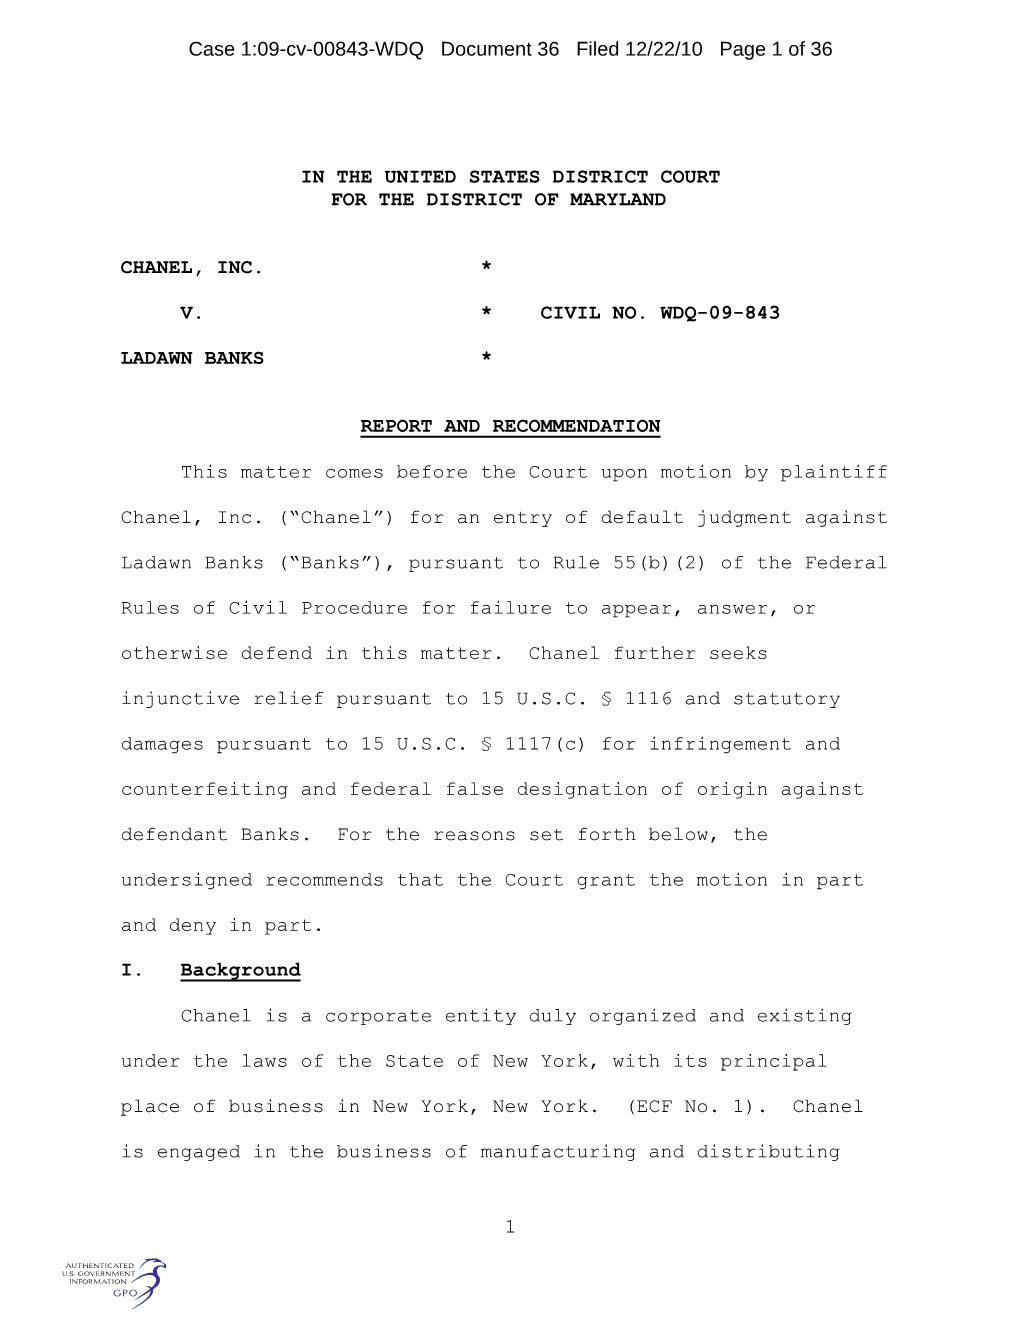 Case 1:09-Cv-00843-WDQ Document 36 Filed 12/22/10 Page 1 of 36